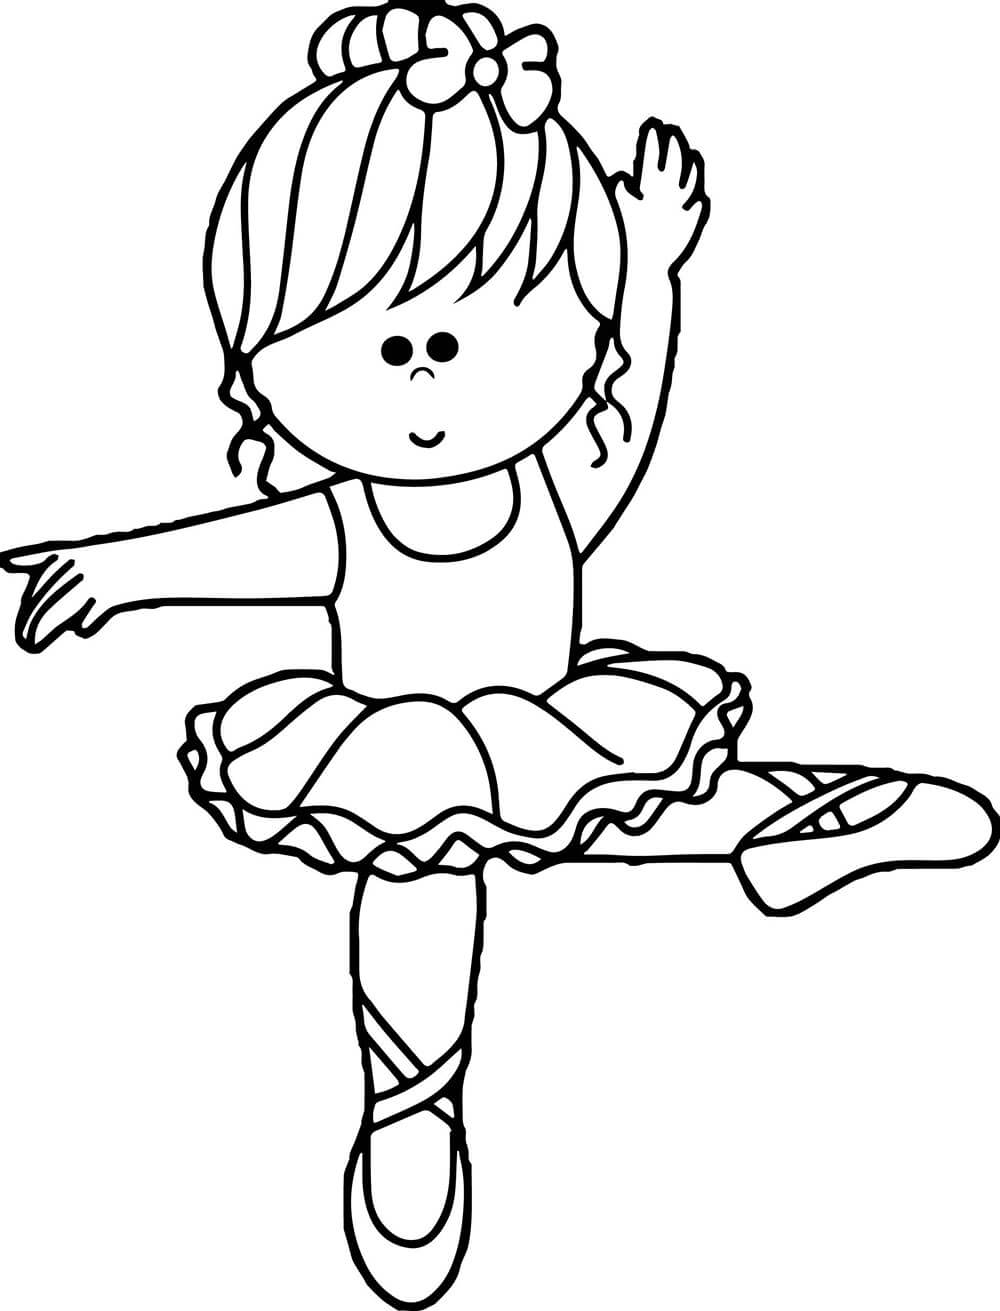 Cartoon Ballerina Coloring Page   Free Printable Coloring Pages ...